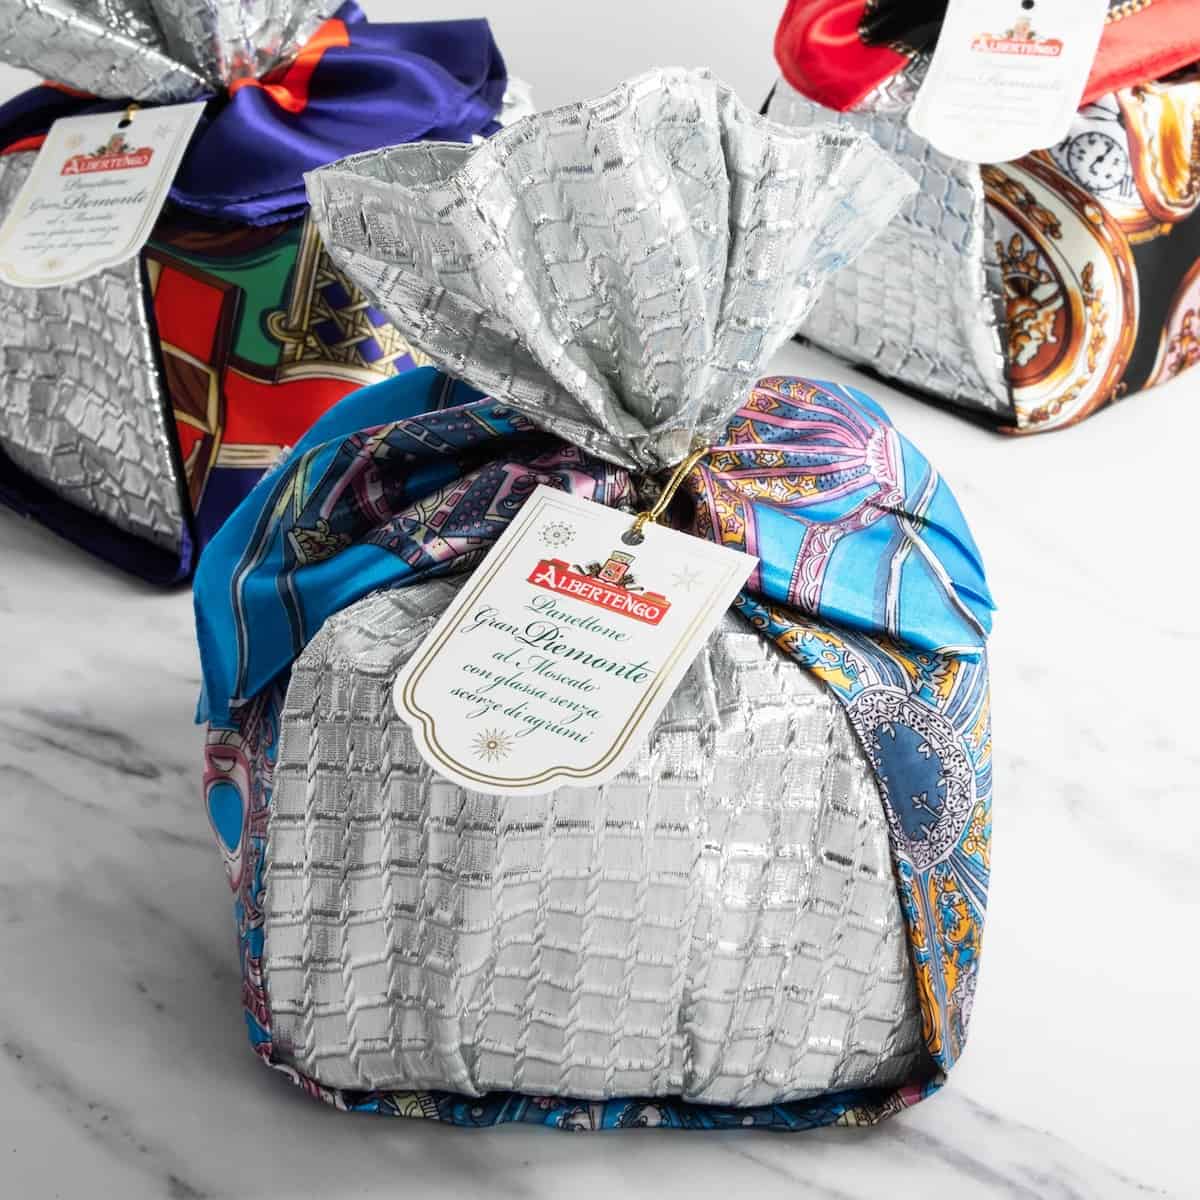 Beautifully wrapped Albertengo Panettone available from igourmet